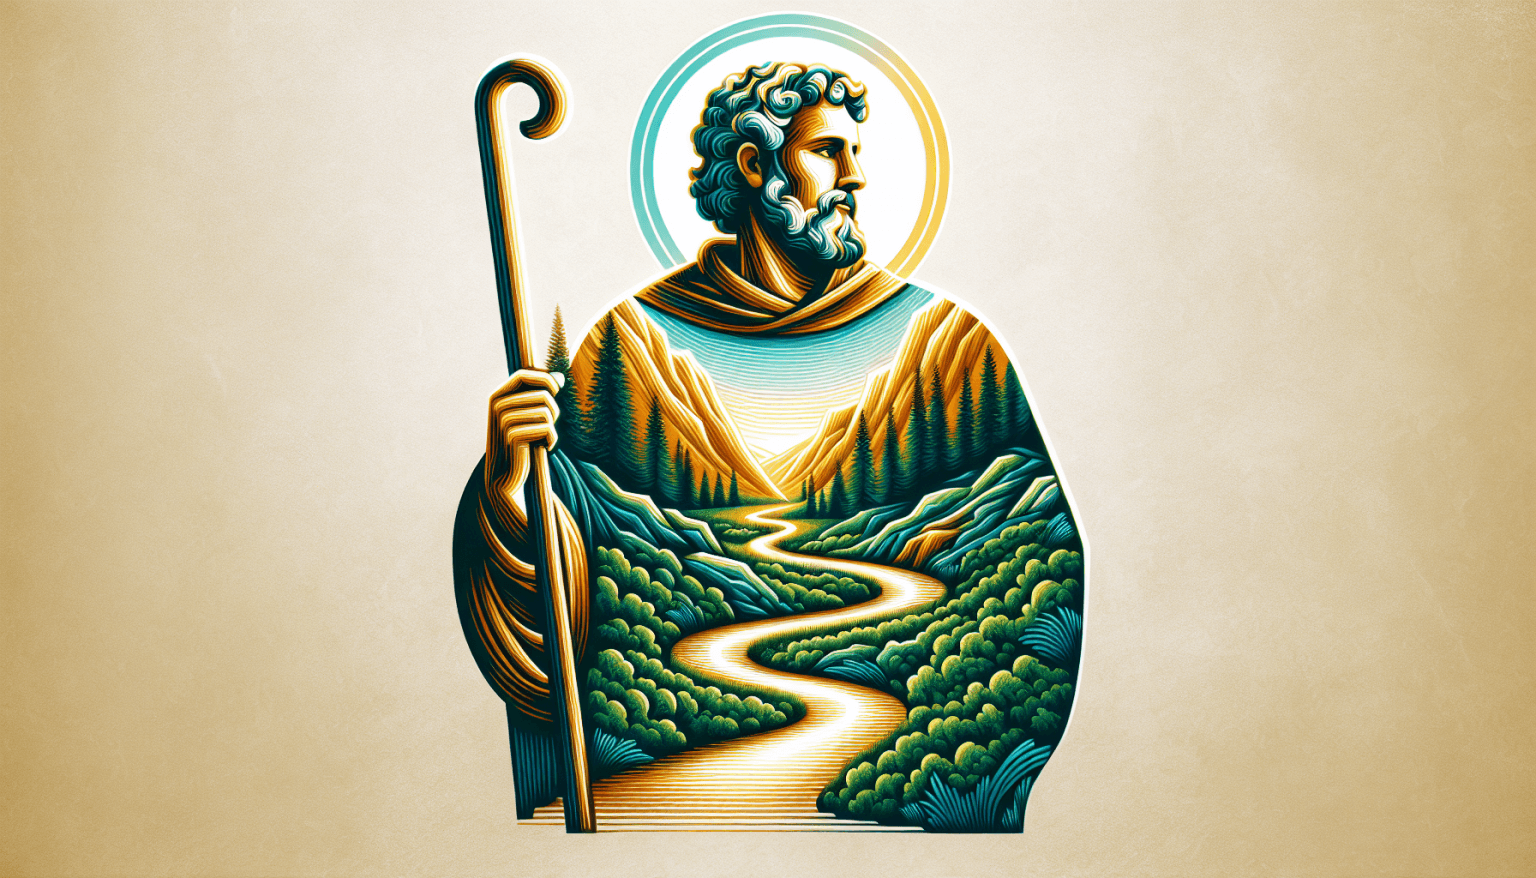 An artistic depiction of Saint James the Apostle standing in a picturesque pathway leading through stunning woodland scenery, holding a staff and radiating a warm, subtle glow, symbolizing guidance an